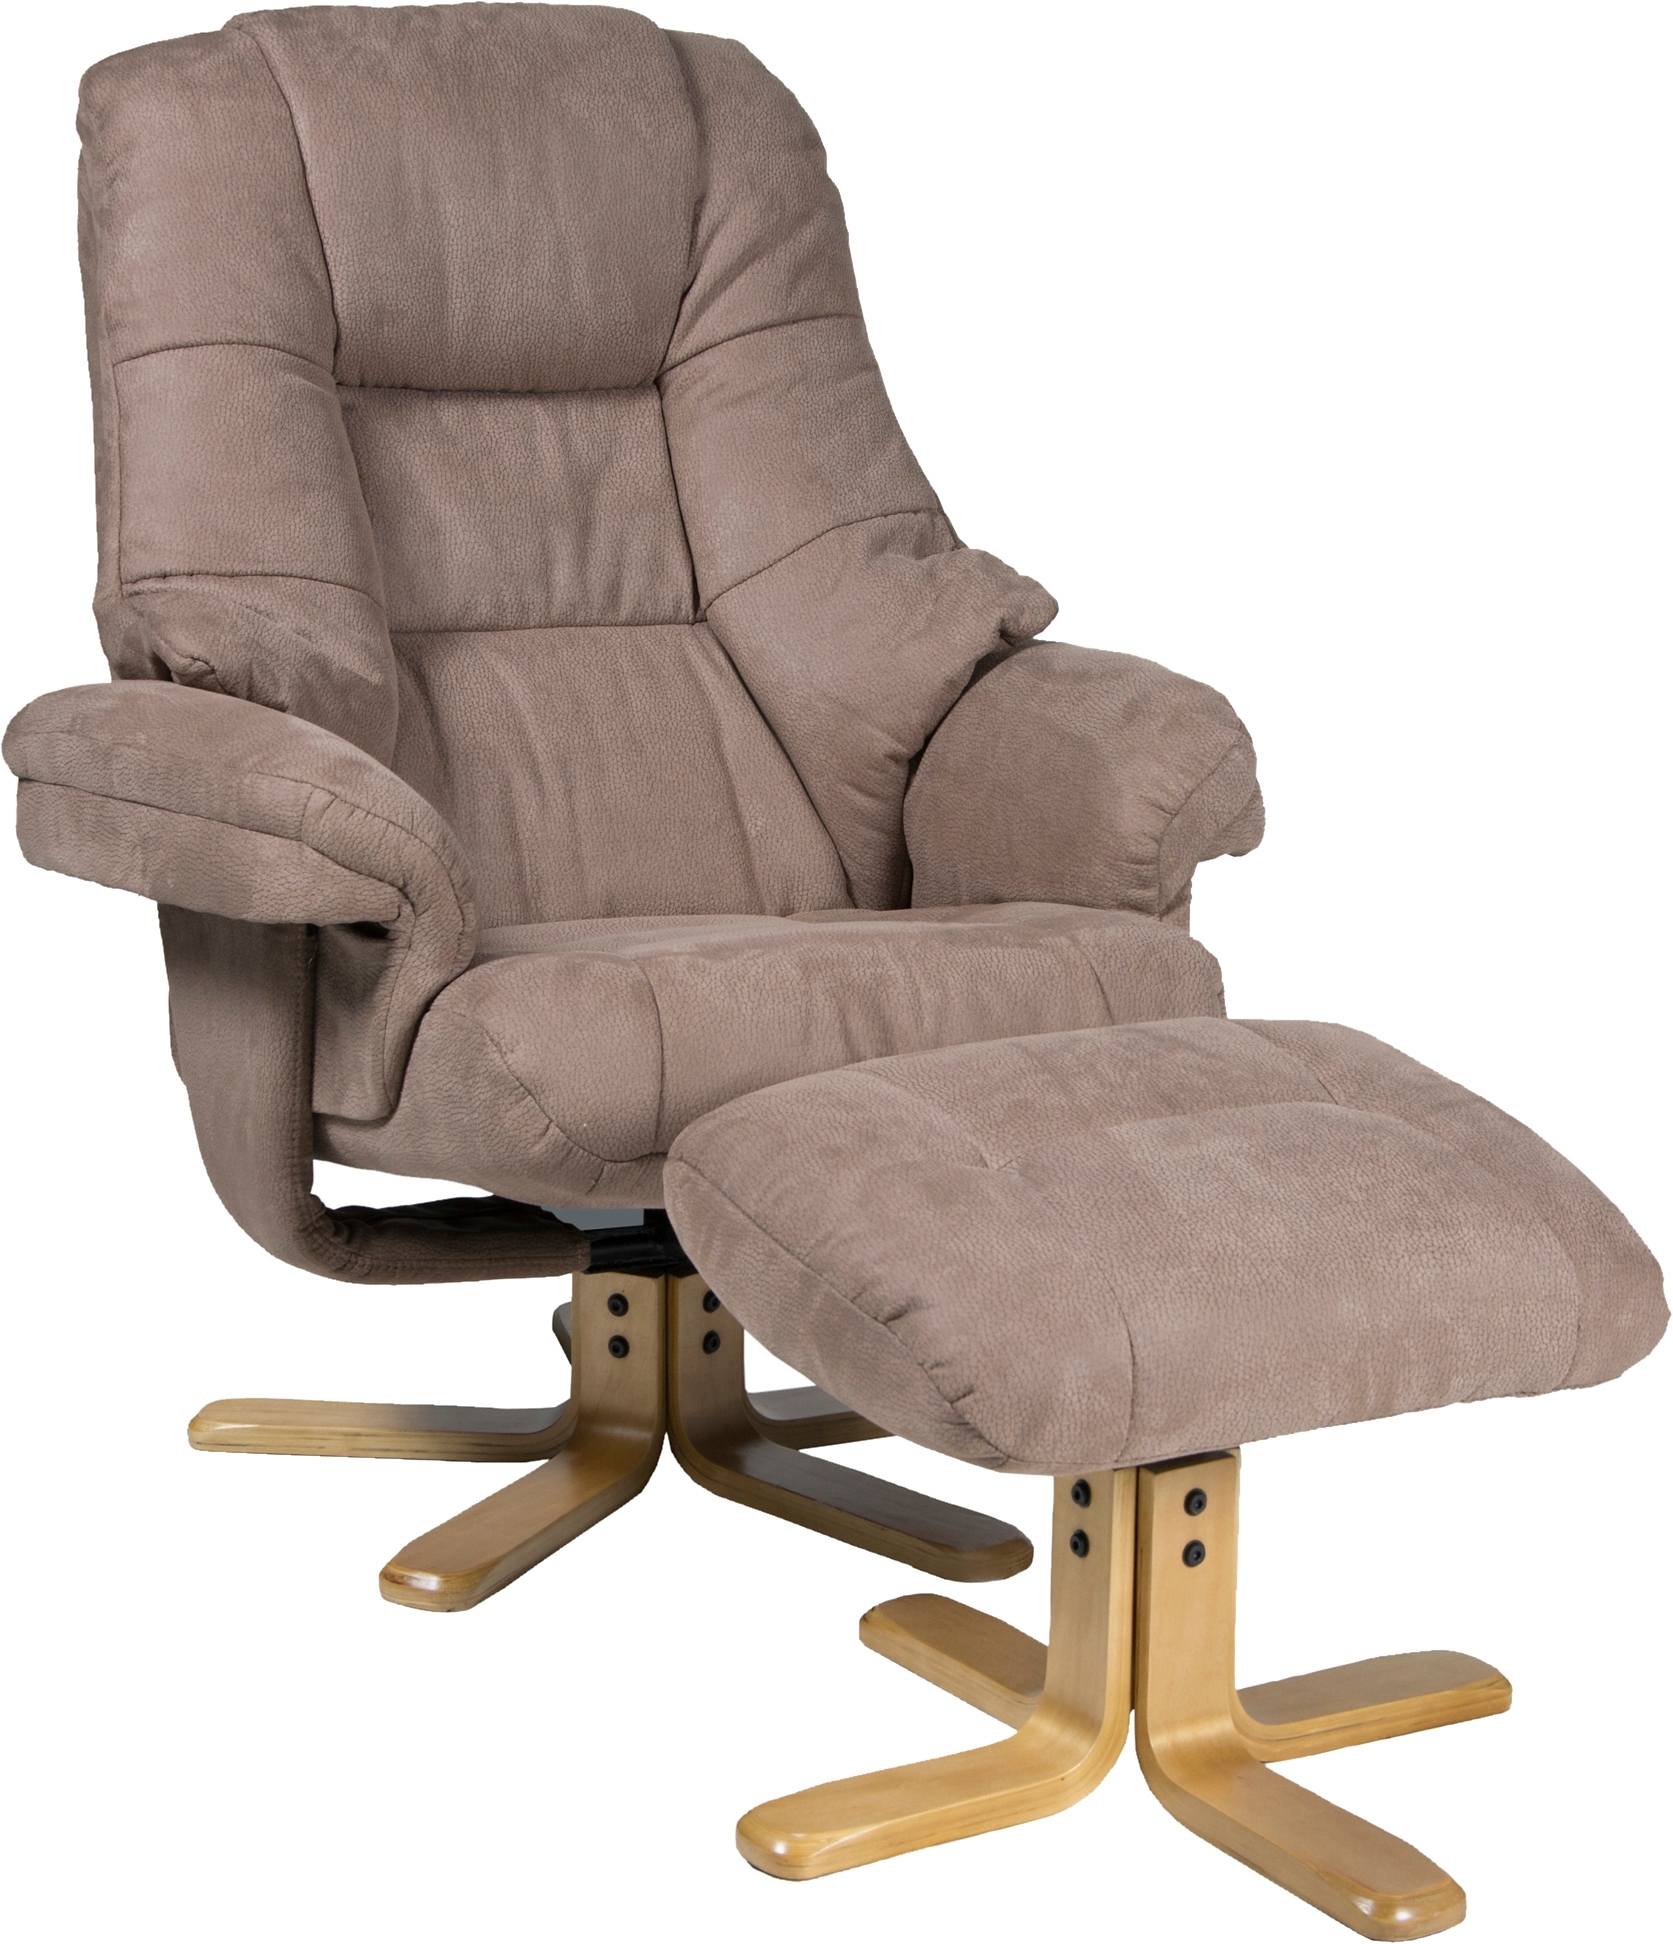 Duo Collection Relaxfauteuil in de online OTTO